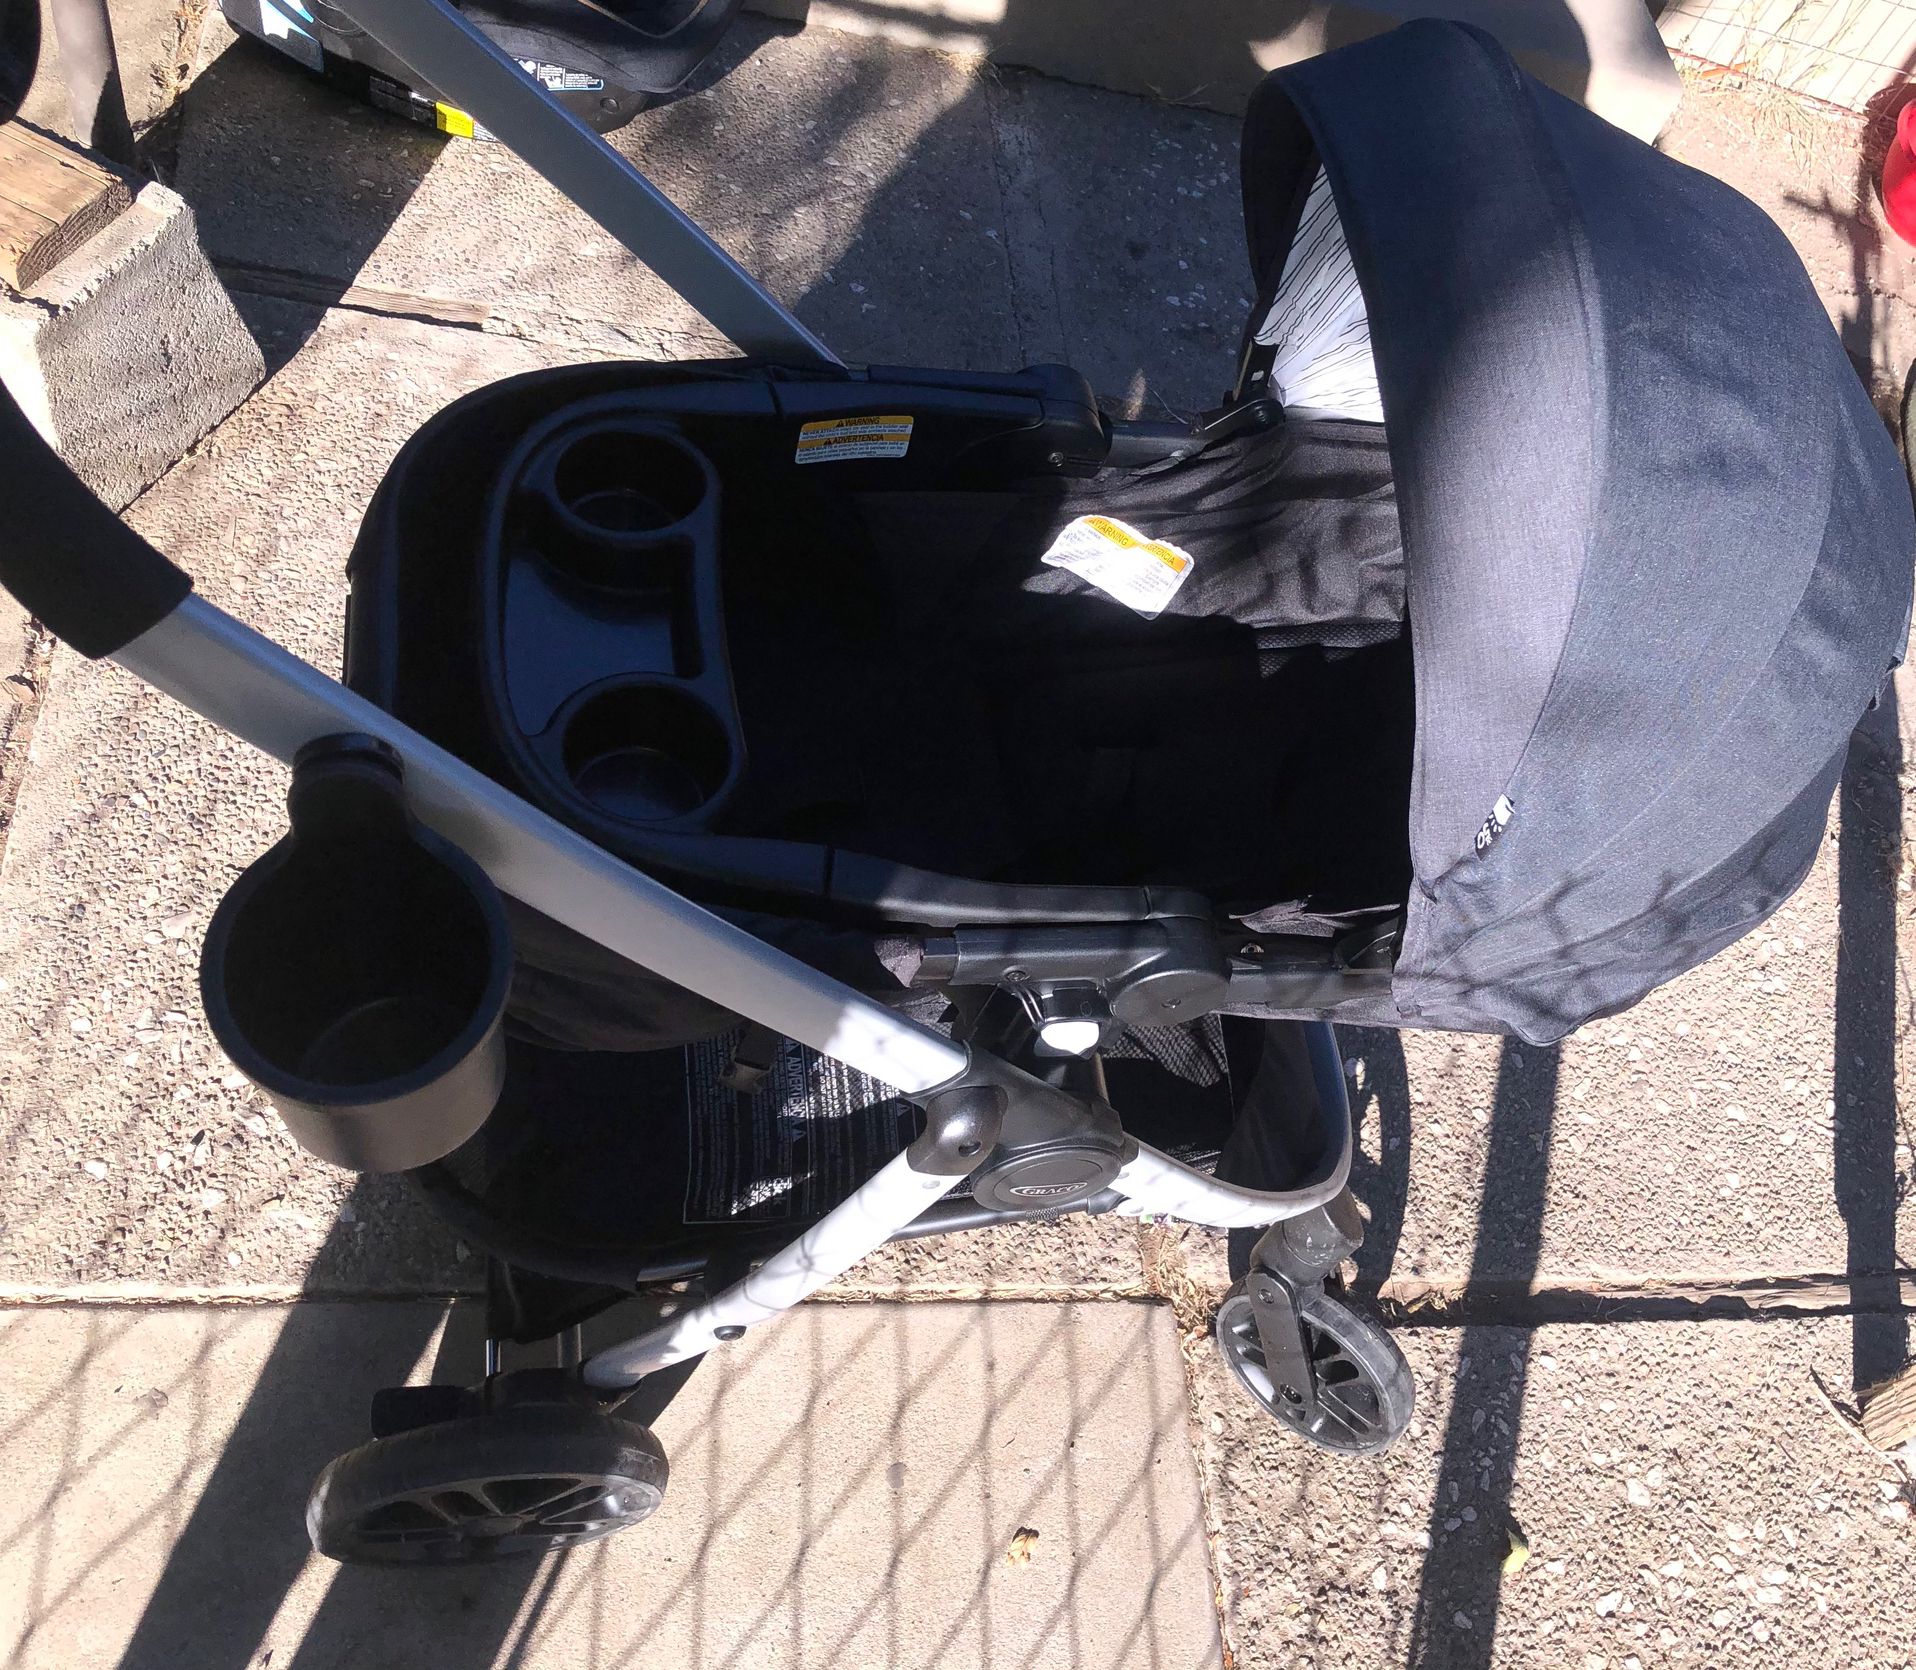 graco stroller and car seat with base